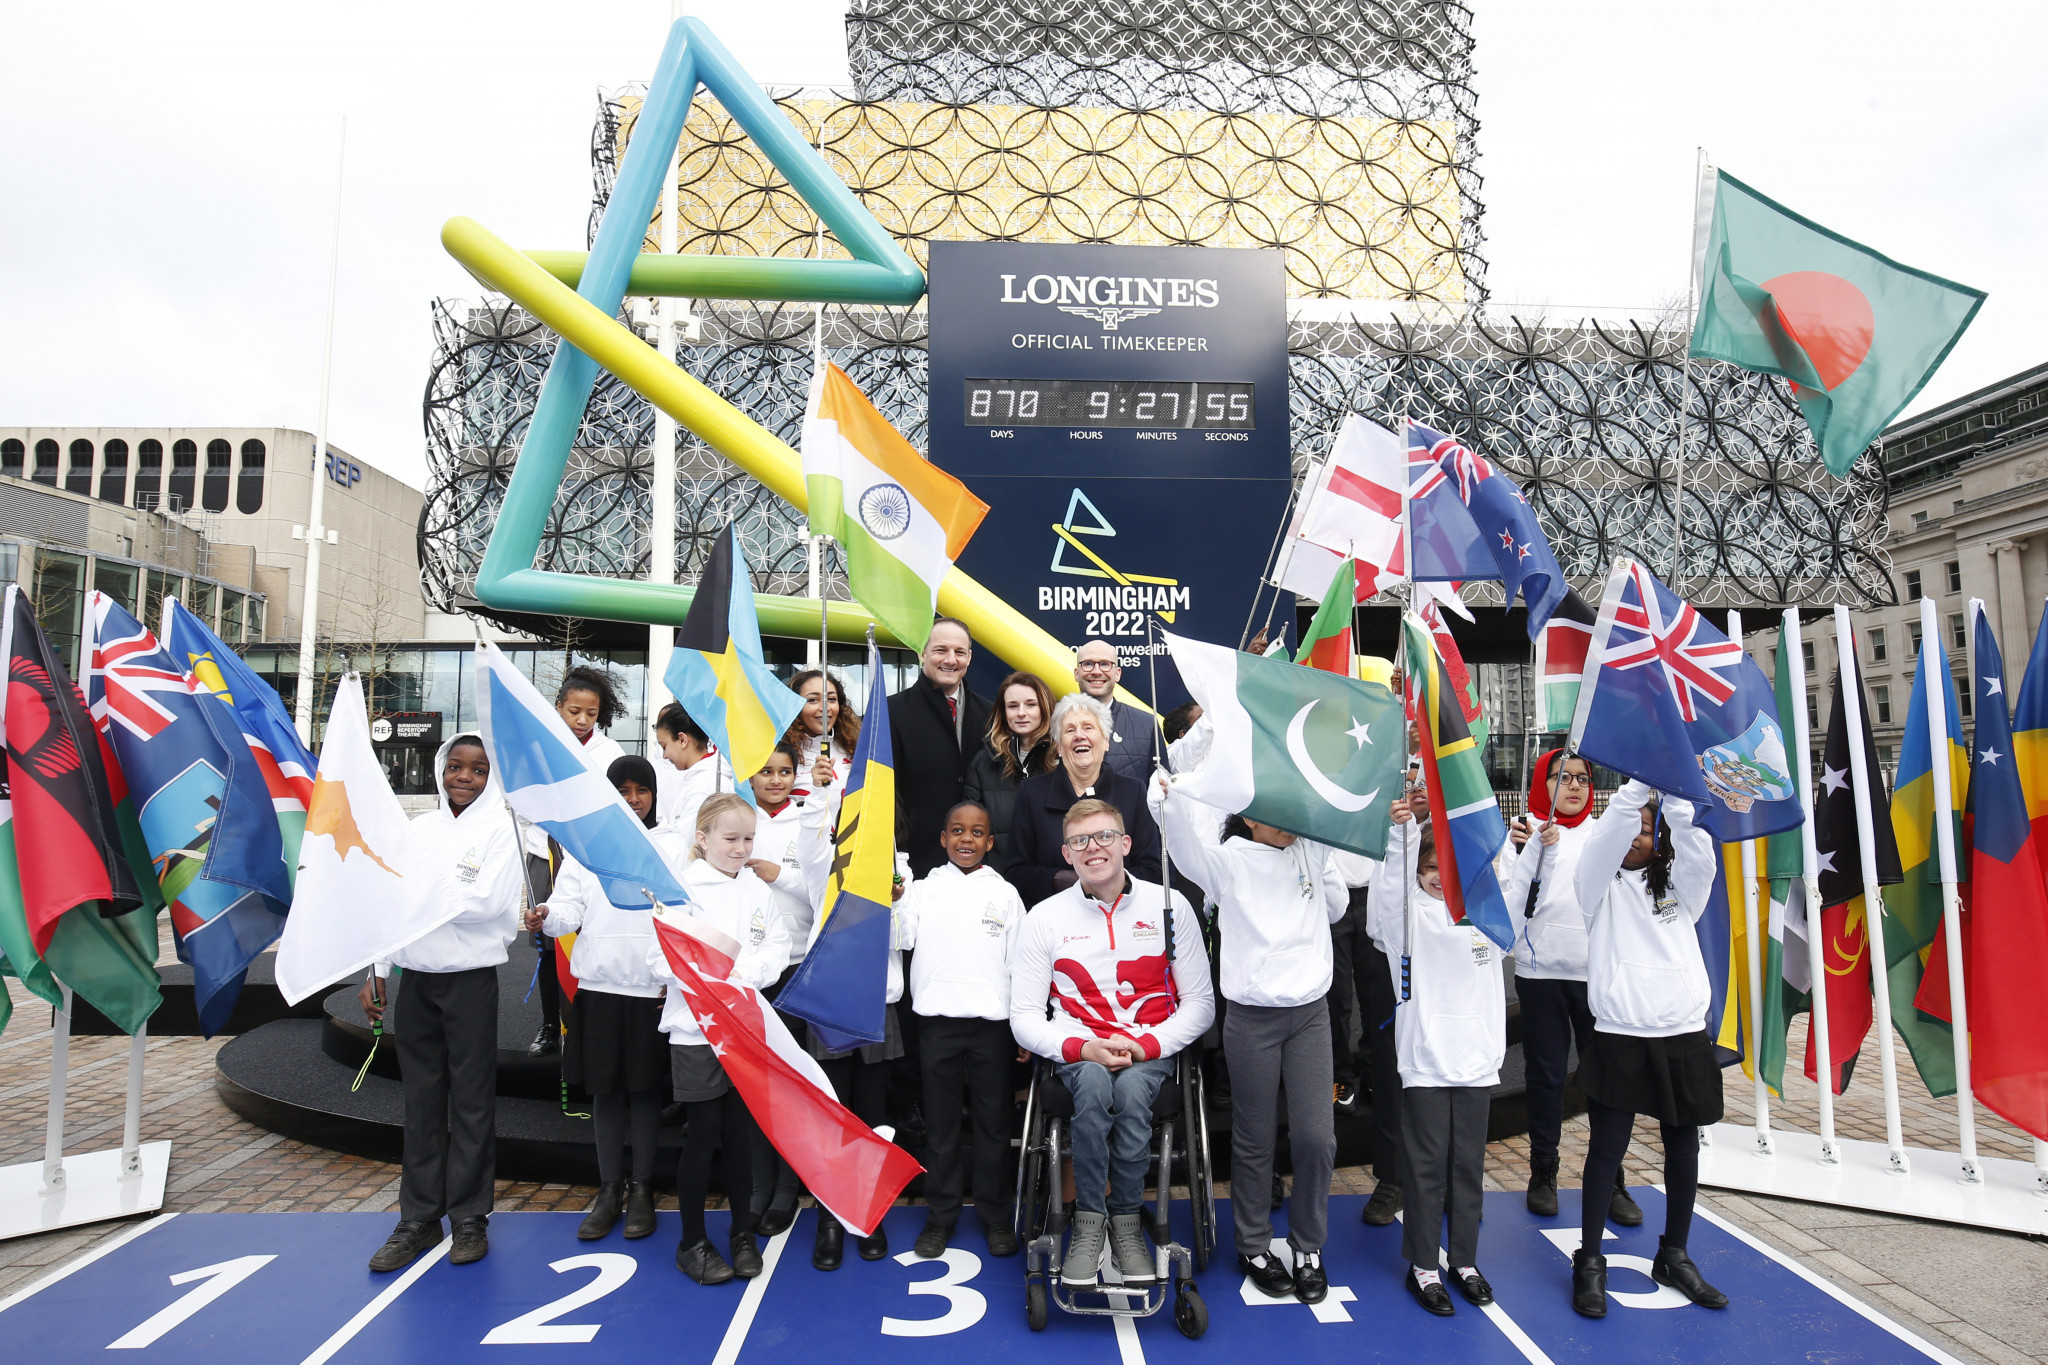 The Birmingham 2022 countdown clock was unveiled this week ©Getty Images